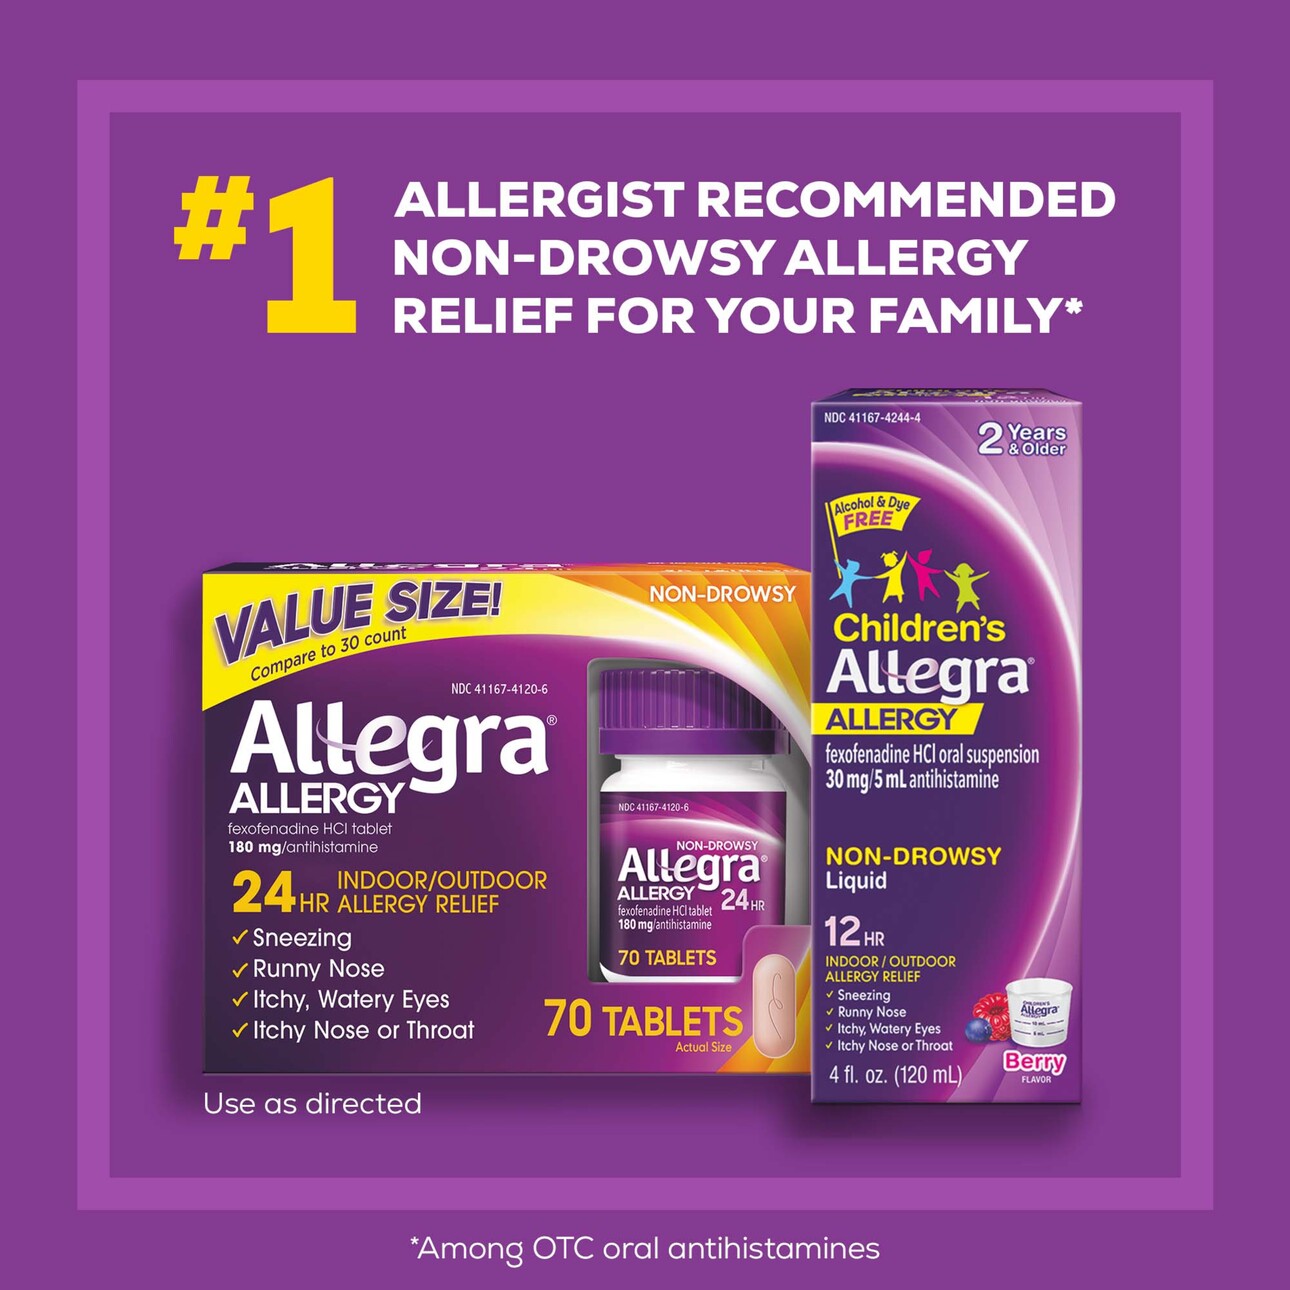 Allegra 24 Hour Non-Drowsy Antihistamine Medicine Tablets for Adult Allergy Relief, Fexofenadine, 180 mg, 70 Pills - image 5 of 7